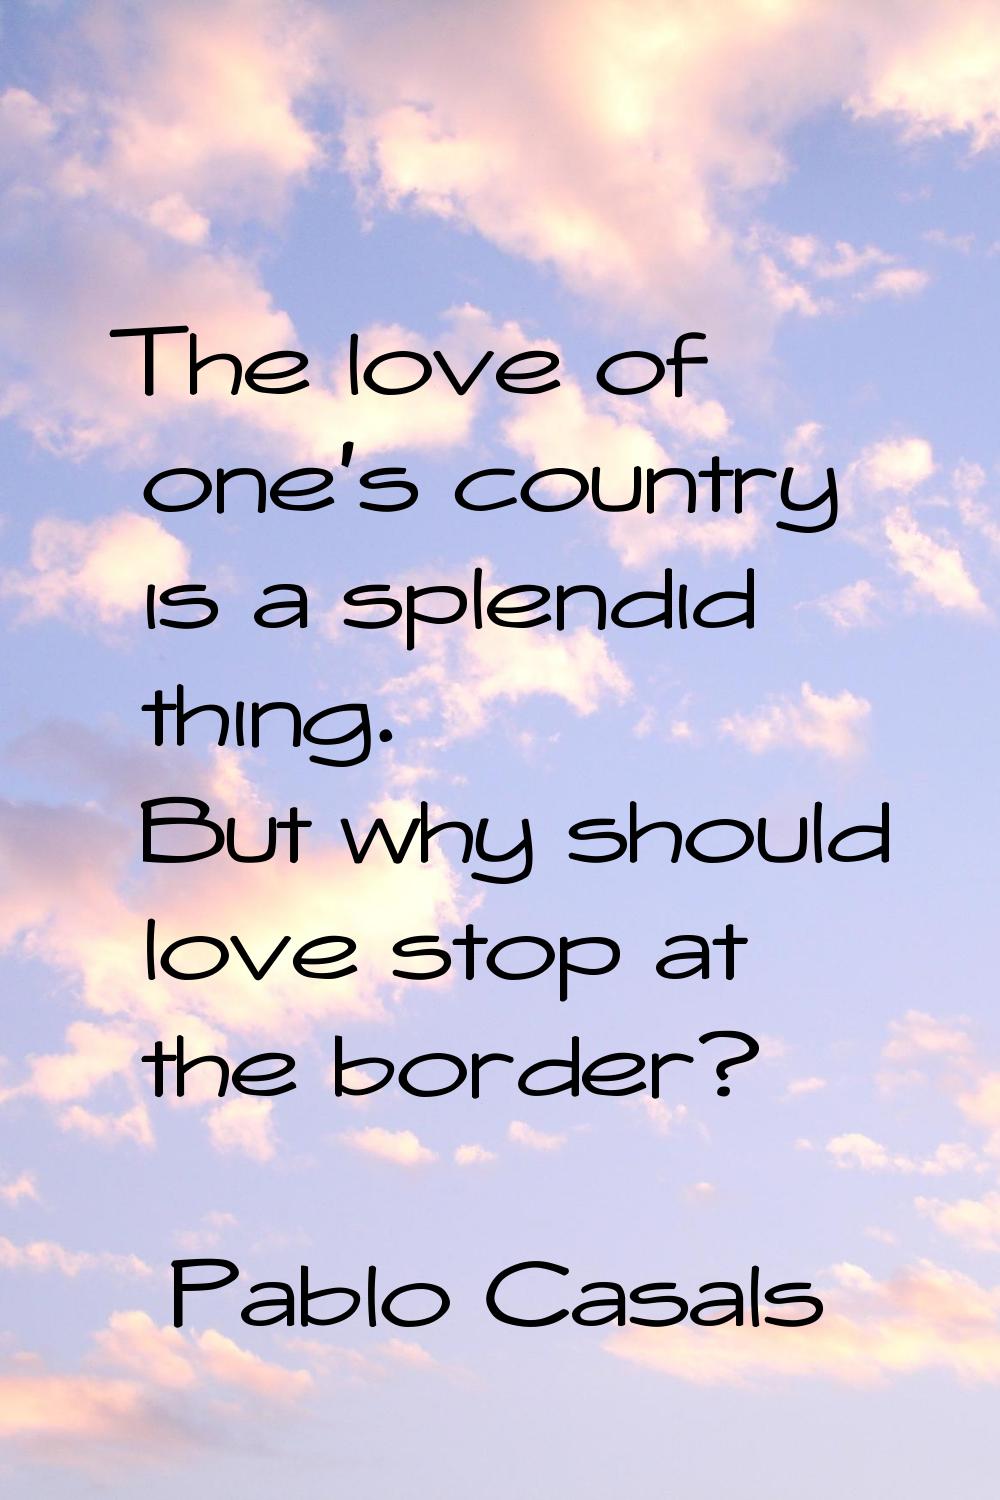 The love of one's country is a splendid thing. But why should love stop at the border?